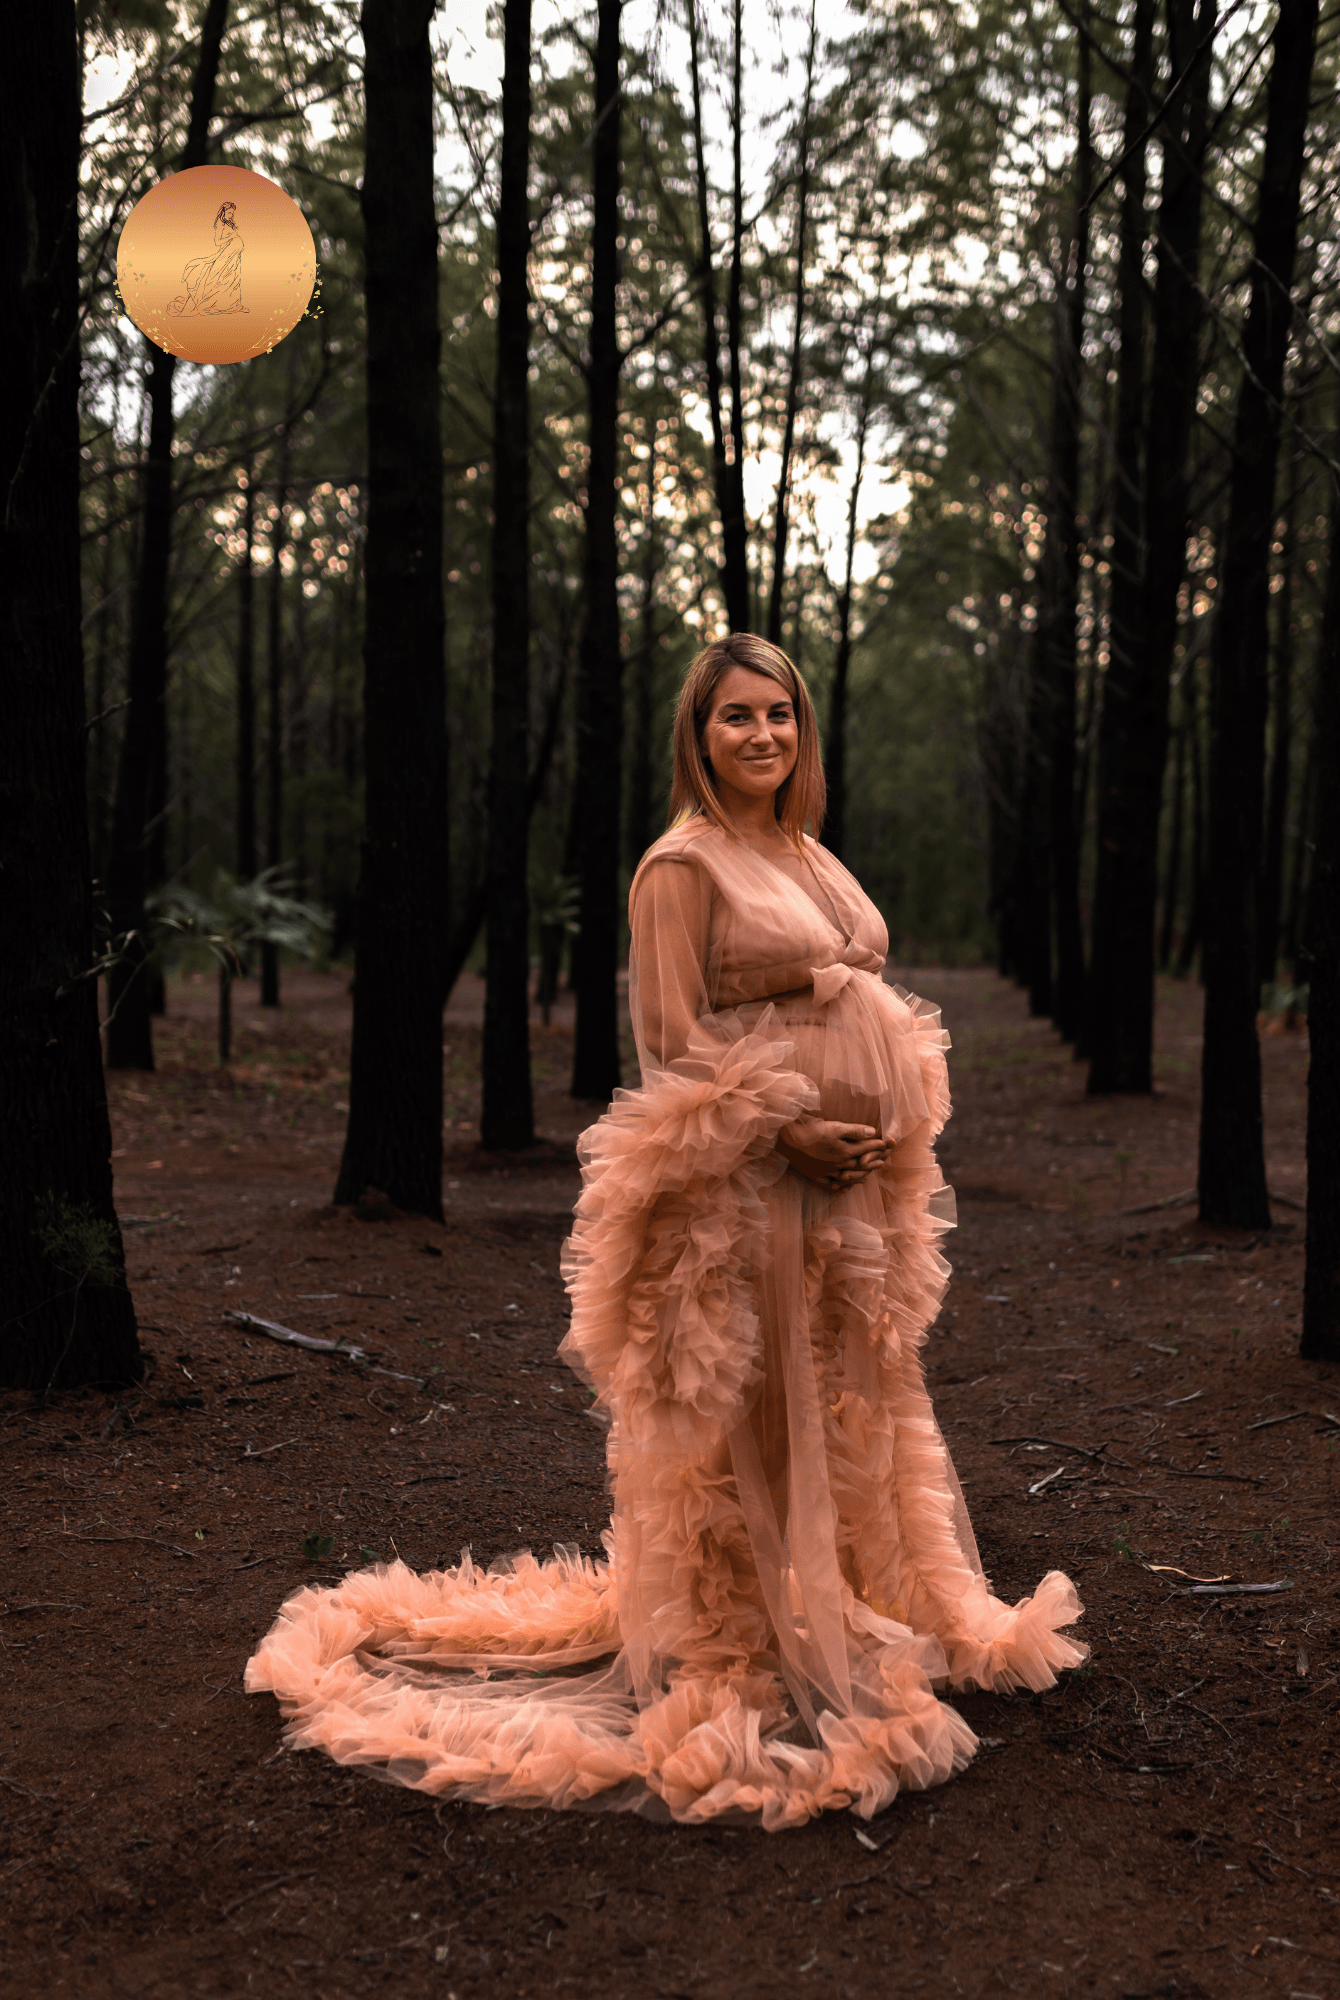 Dress Hire - Maternity Photoshoot Dresses - Ari - Beige Tulle Robe - 4 DAY RENTAL - Luxe Bumps AU